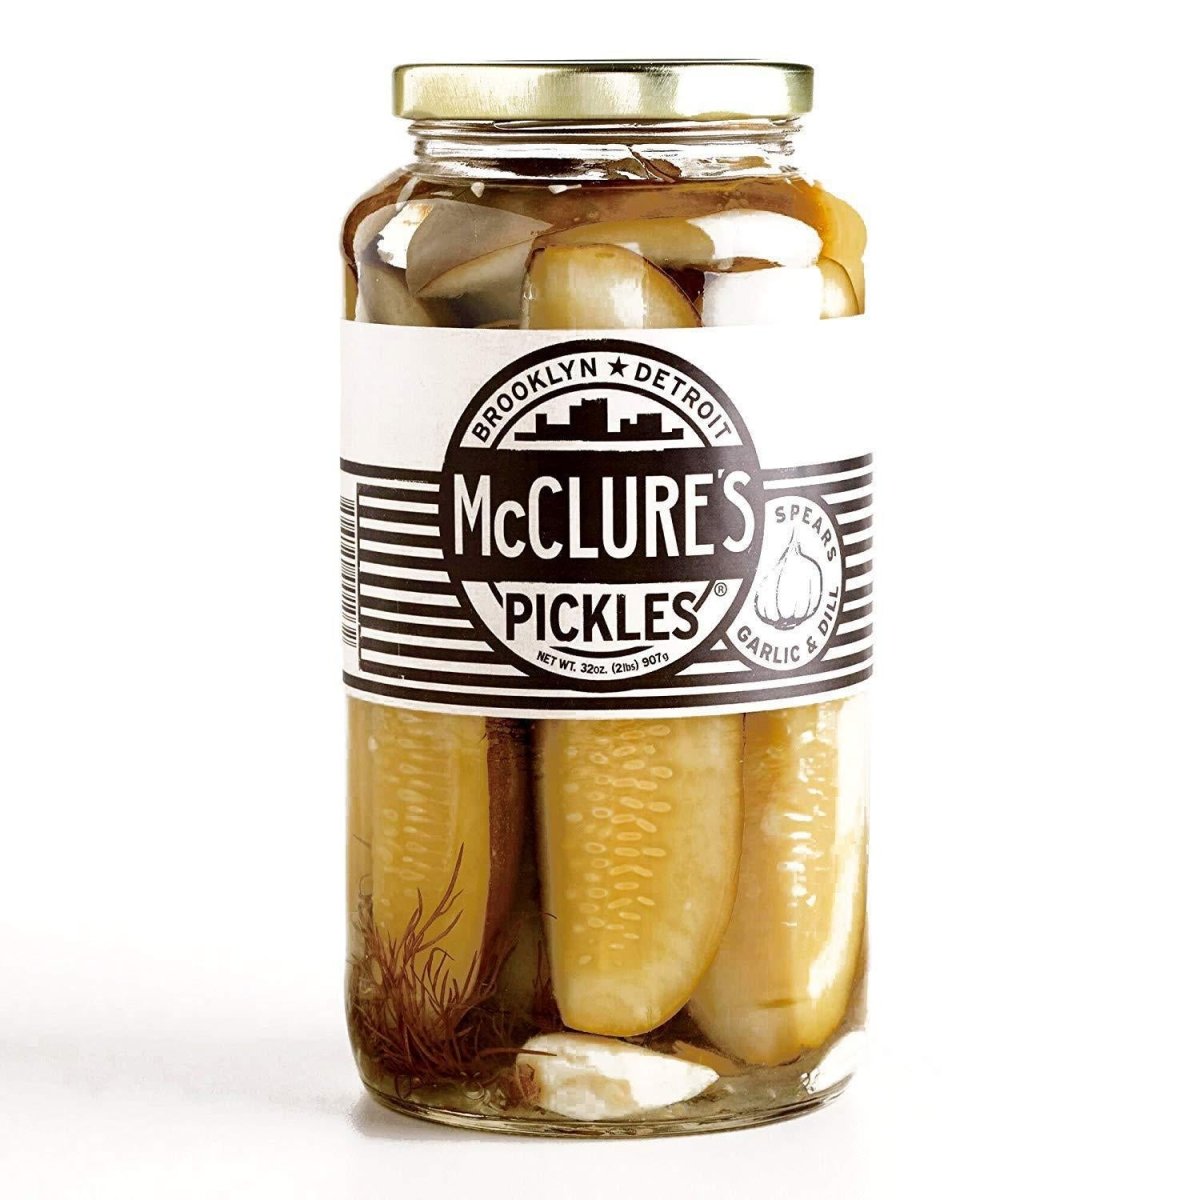 McClure's - 'Garlic & Dill' Spear Pickles (32OZ) - The Epicurean Trader